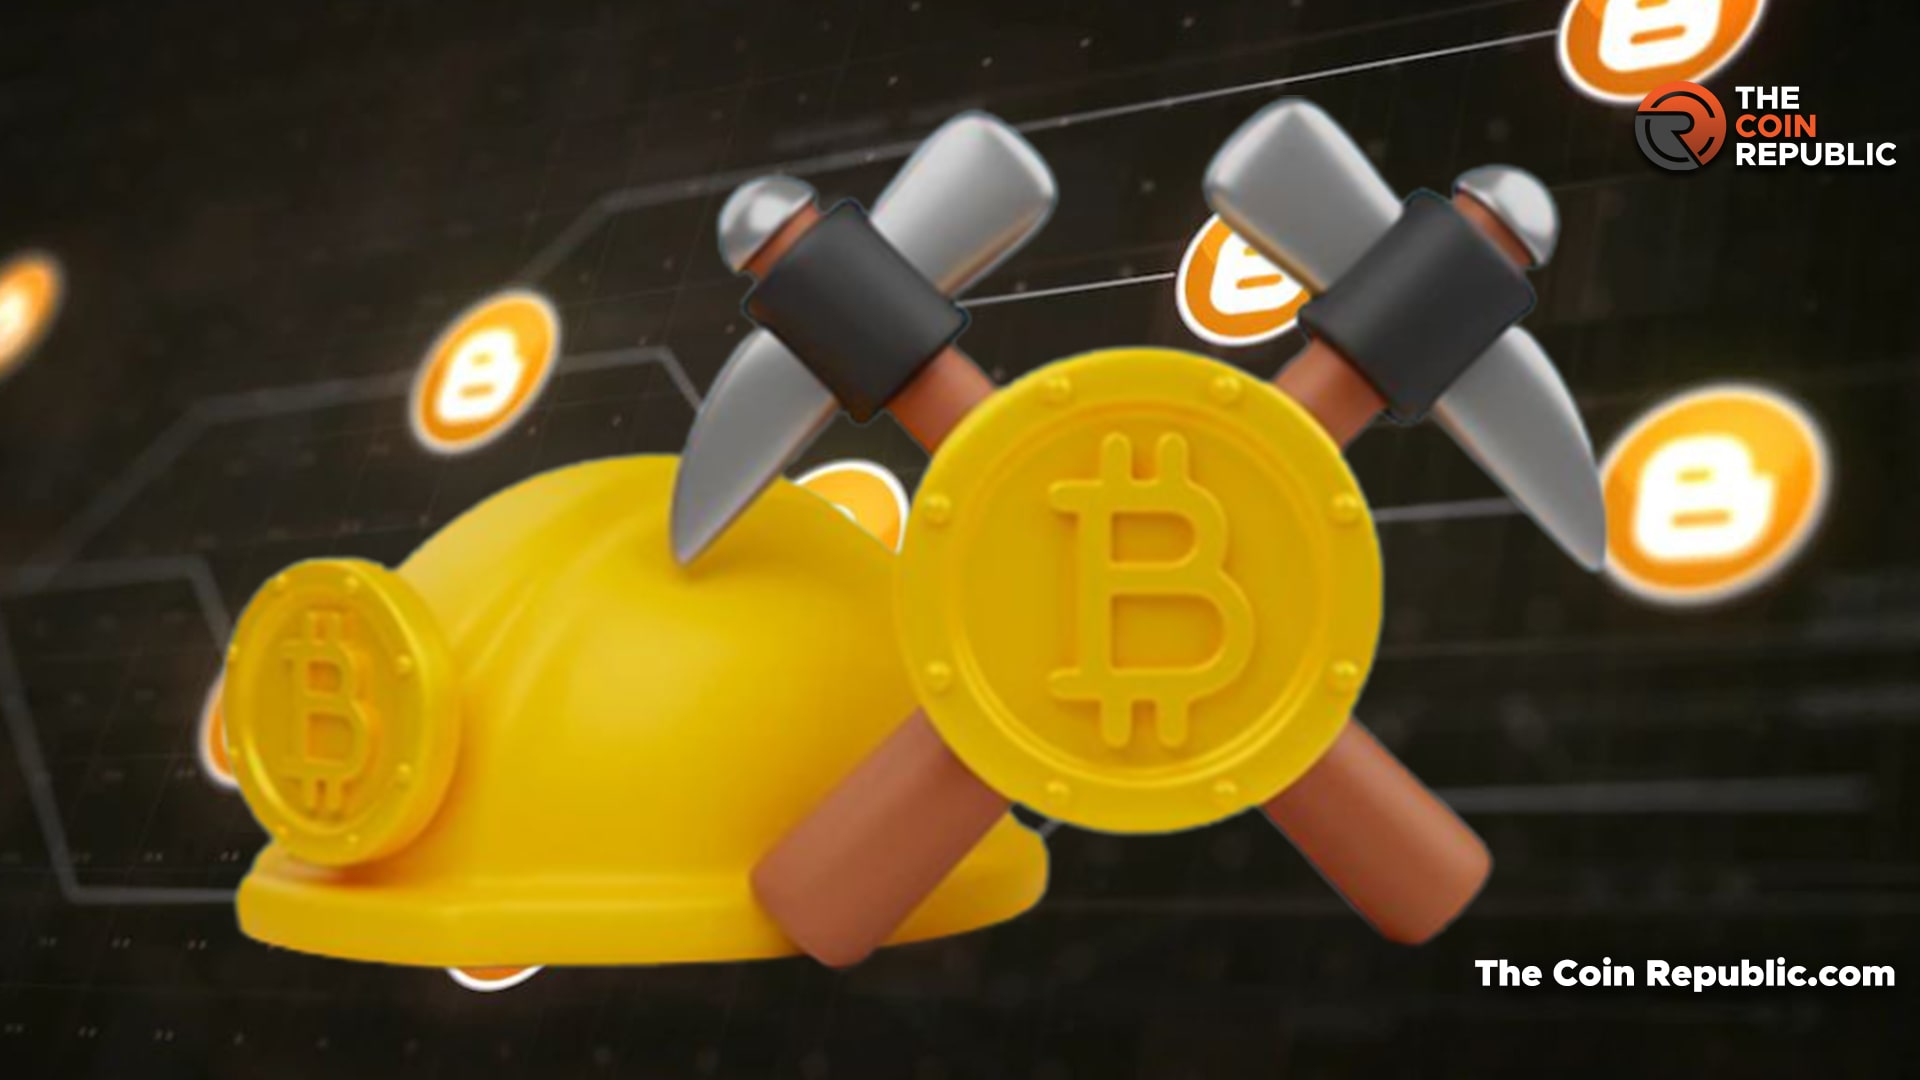 Since The Past Two Years, The Bitcoin Mining Industry Has Suffered enormous losses